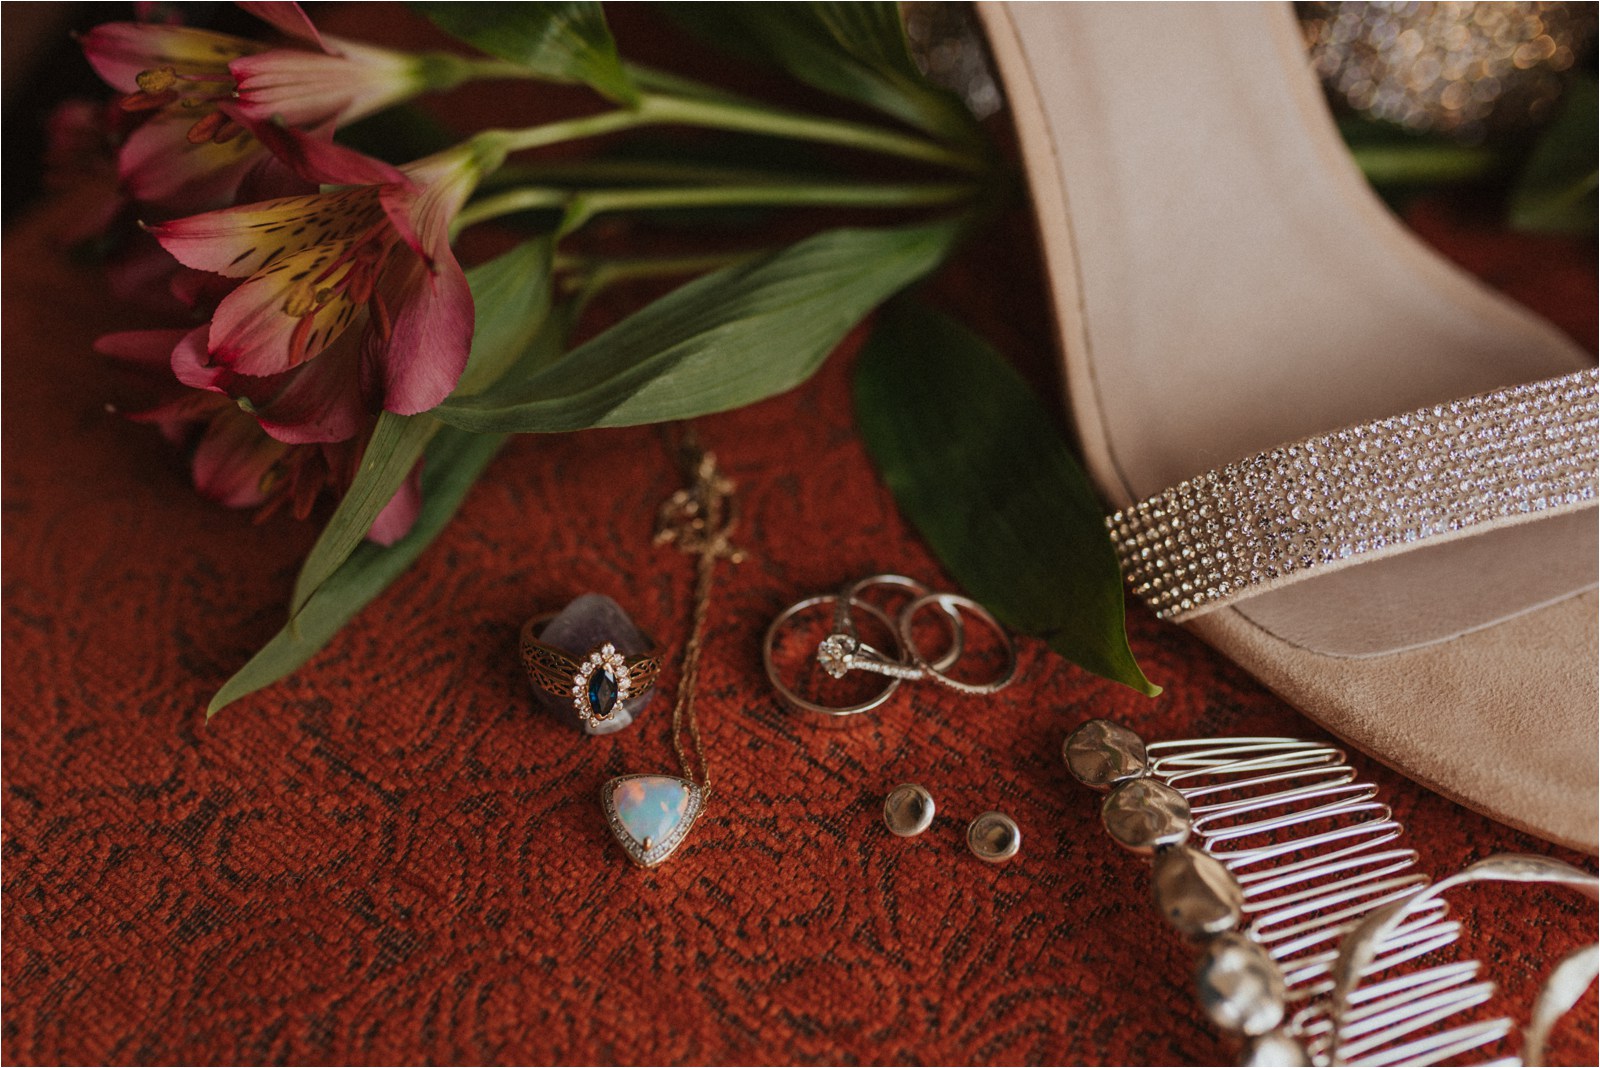 The bride's details, such as jewelry, family heirlooms, and accessories for an elopement in Colorado